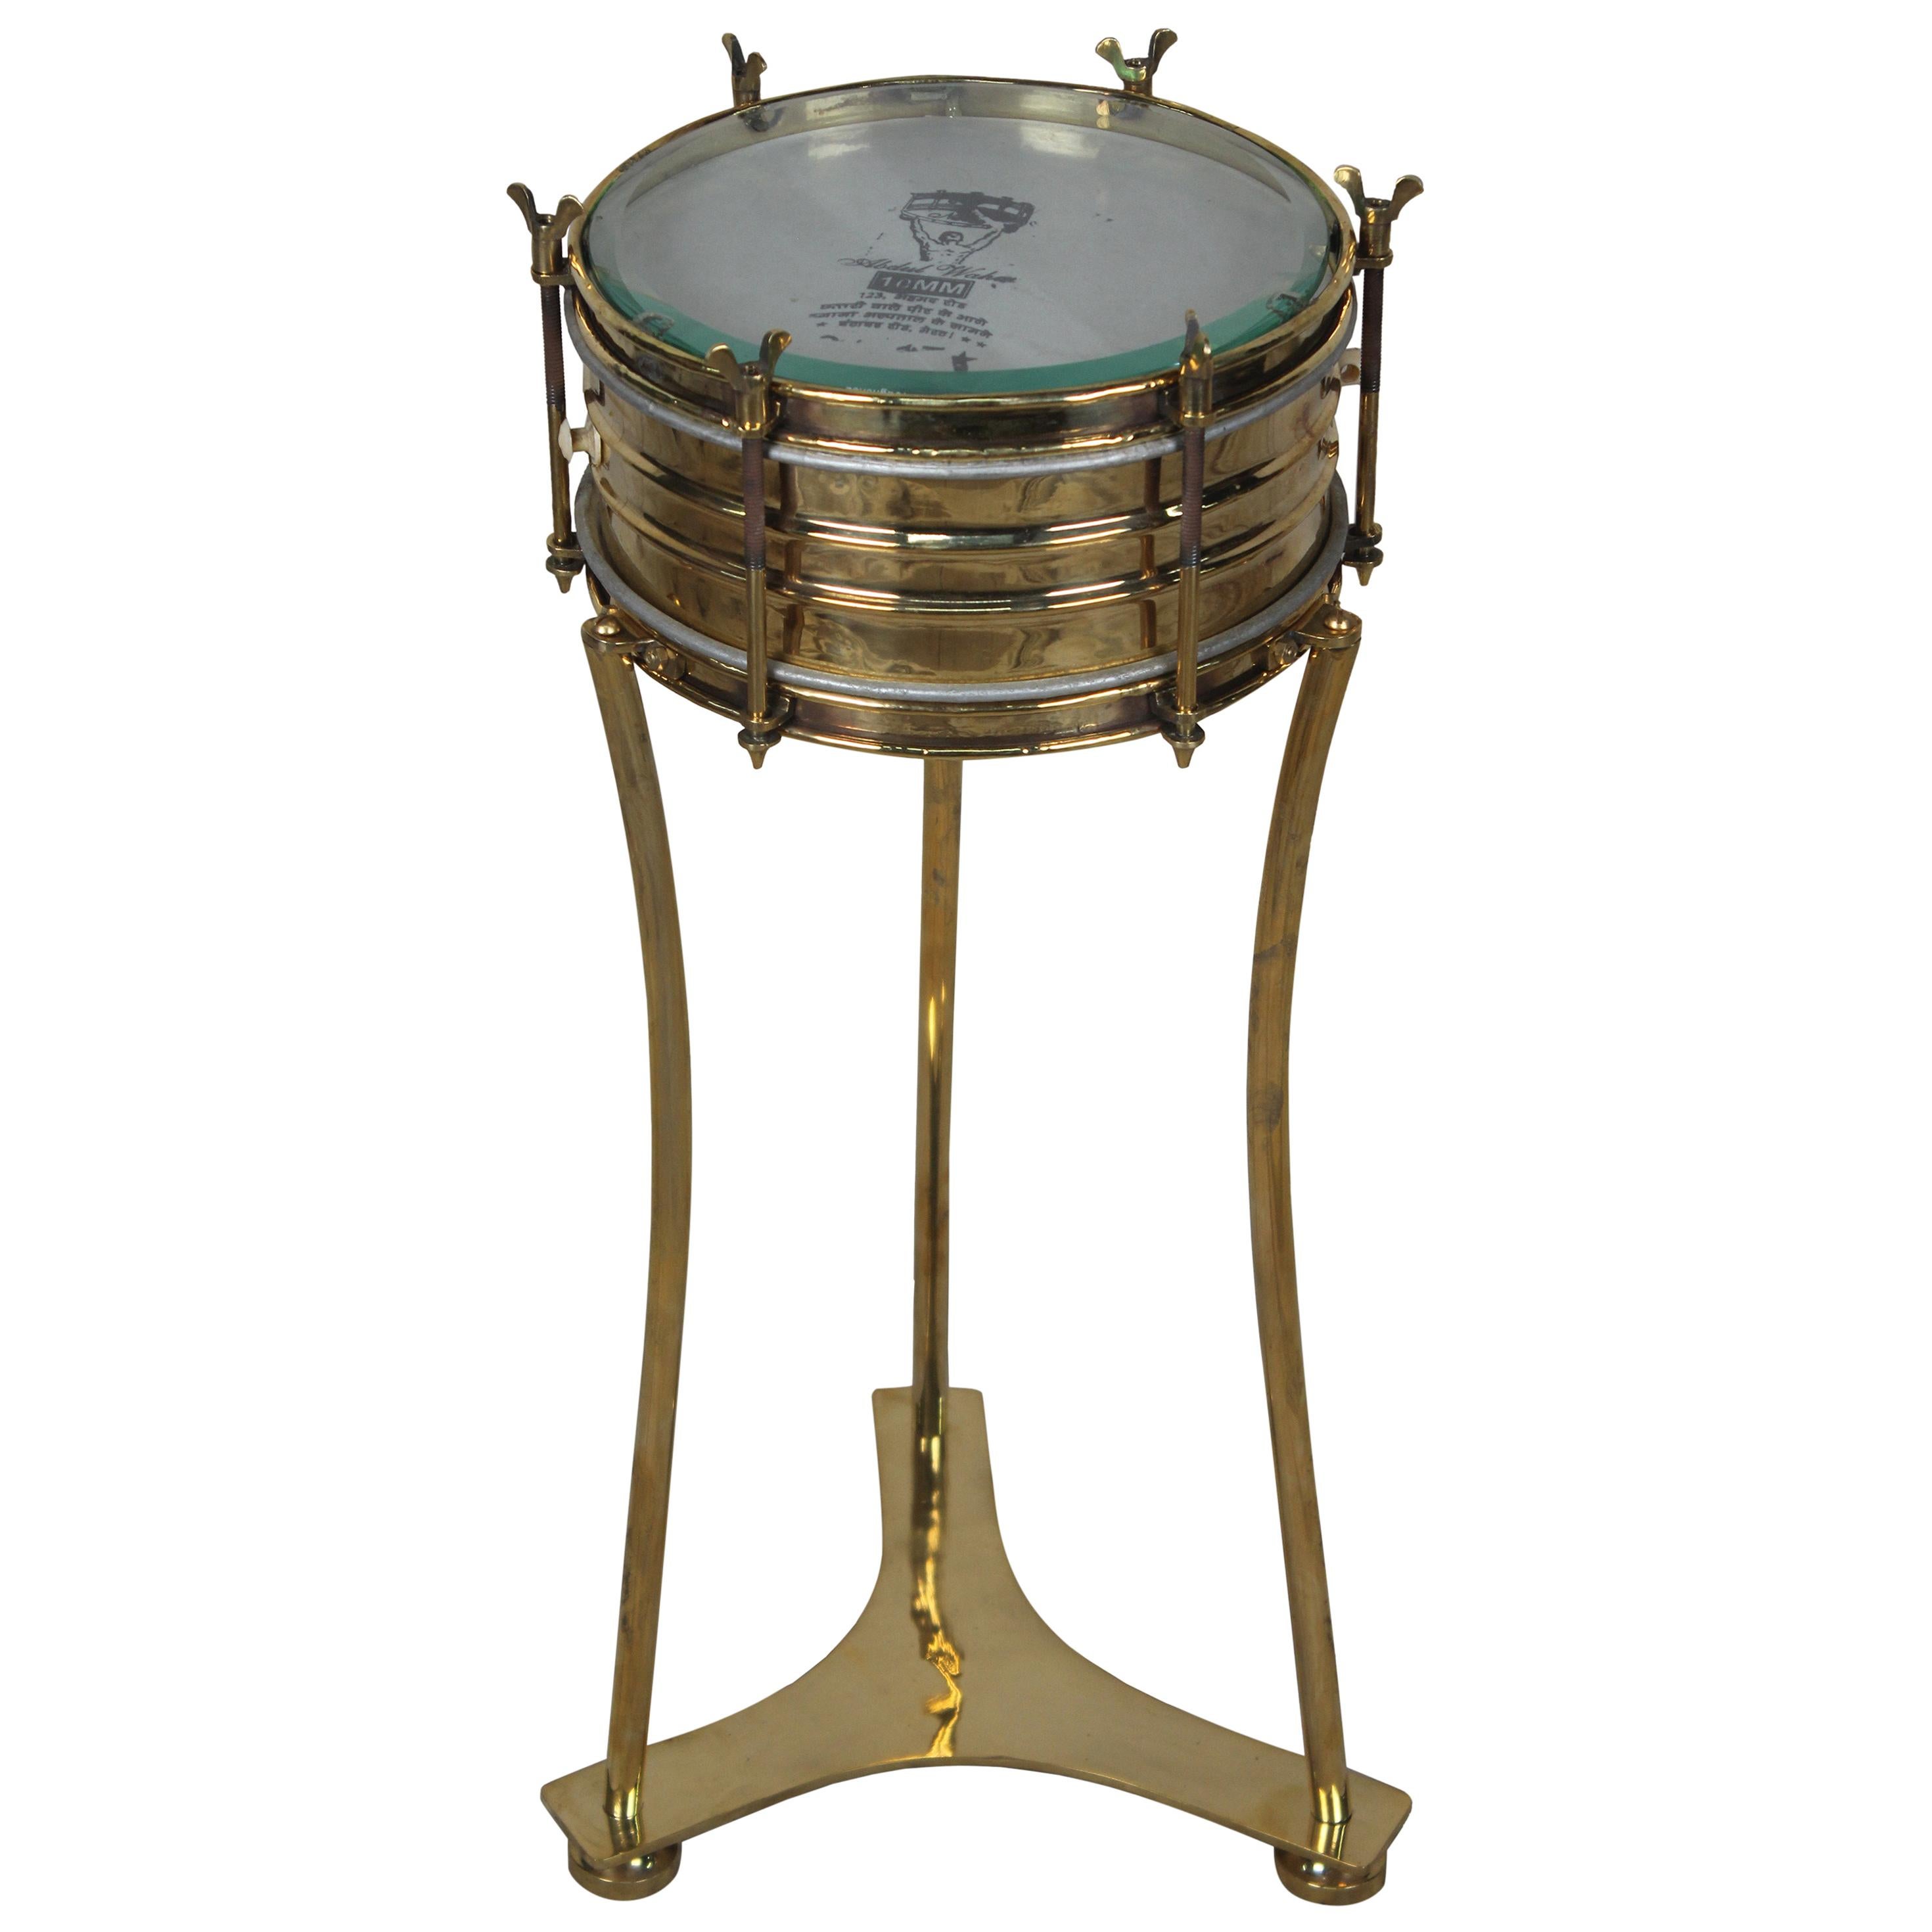 Brass Military or Marching Band Snare Drum Converted to Side Table, Mid-1900s